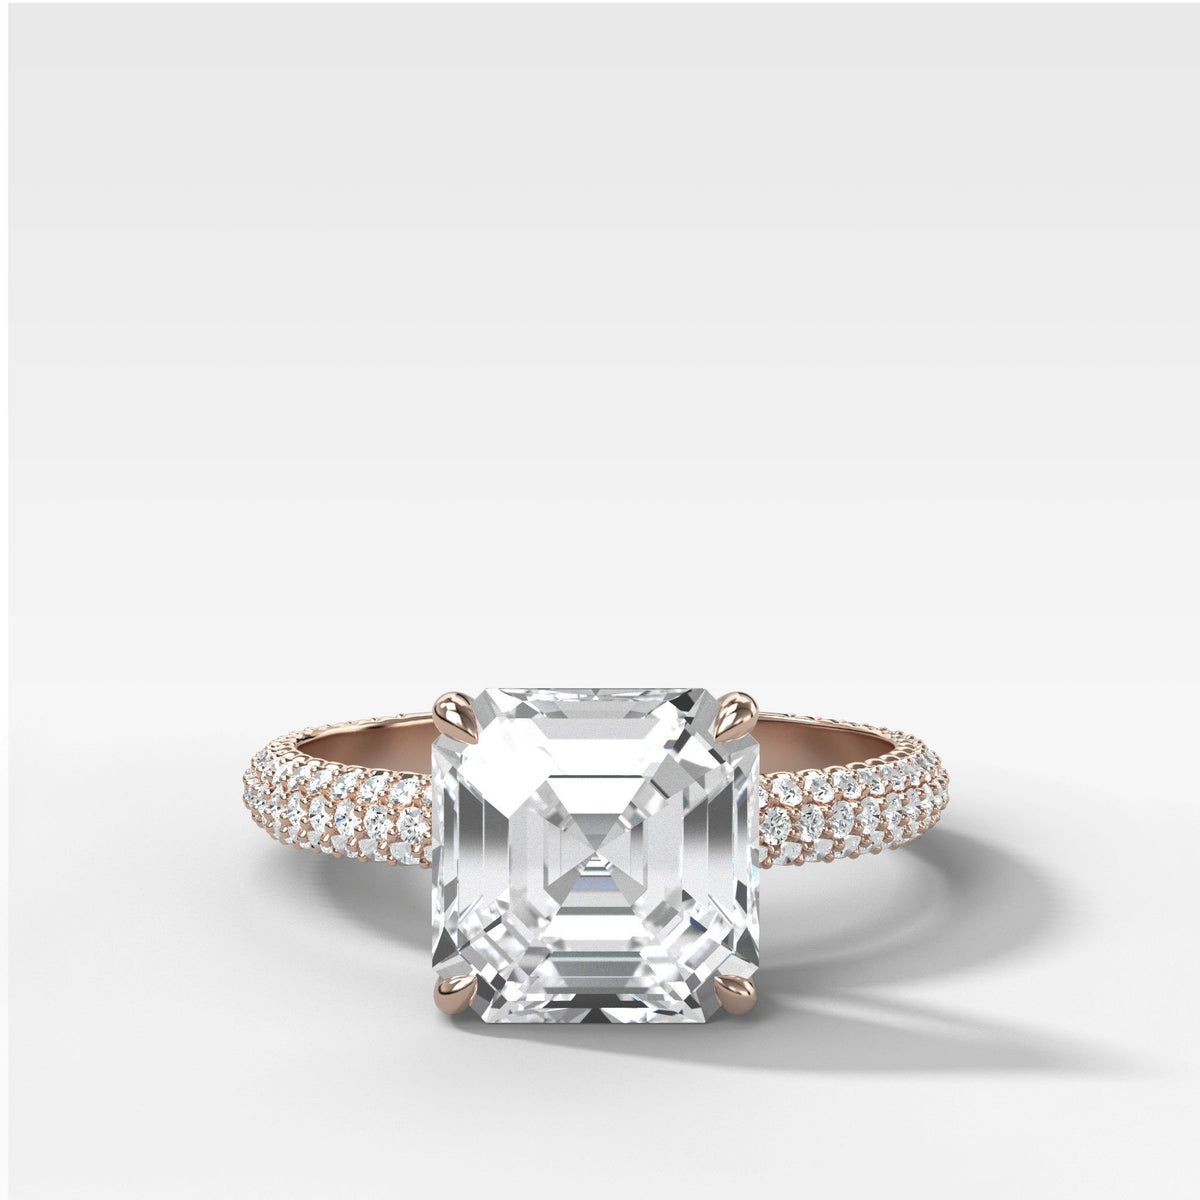 Triple Row Pav≈Ω Engagement Ring With Asscher Cut by Good Stone in Rose Gold